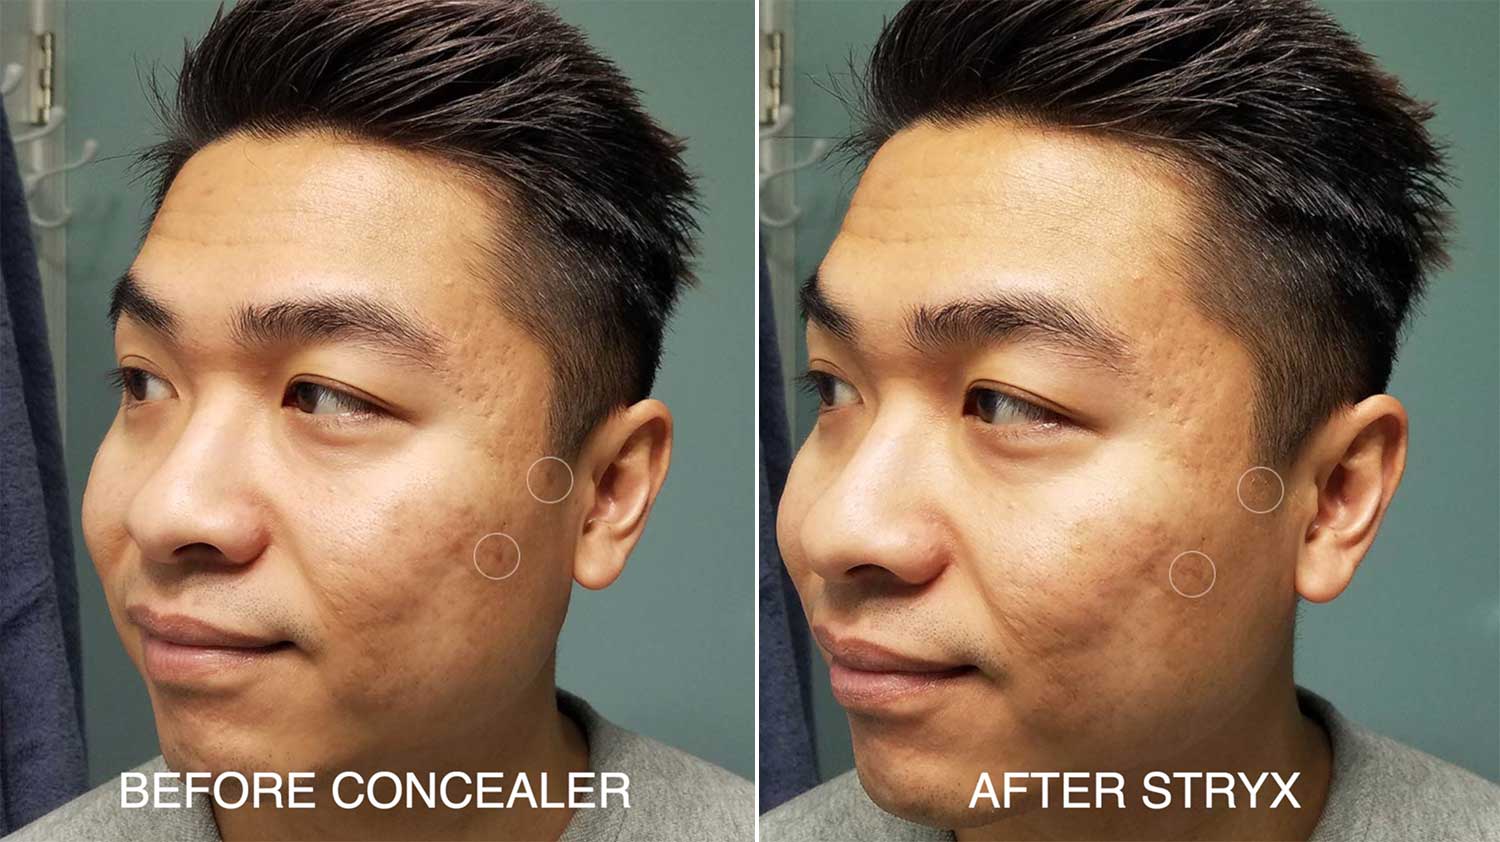 Before And After Stryx Concealer